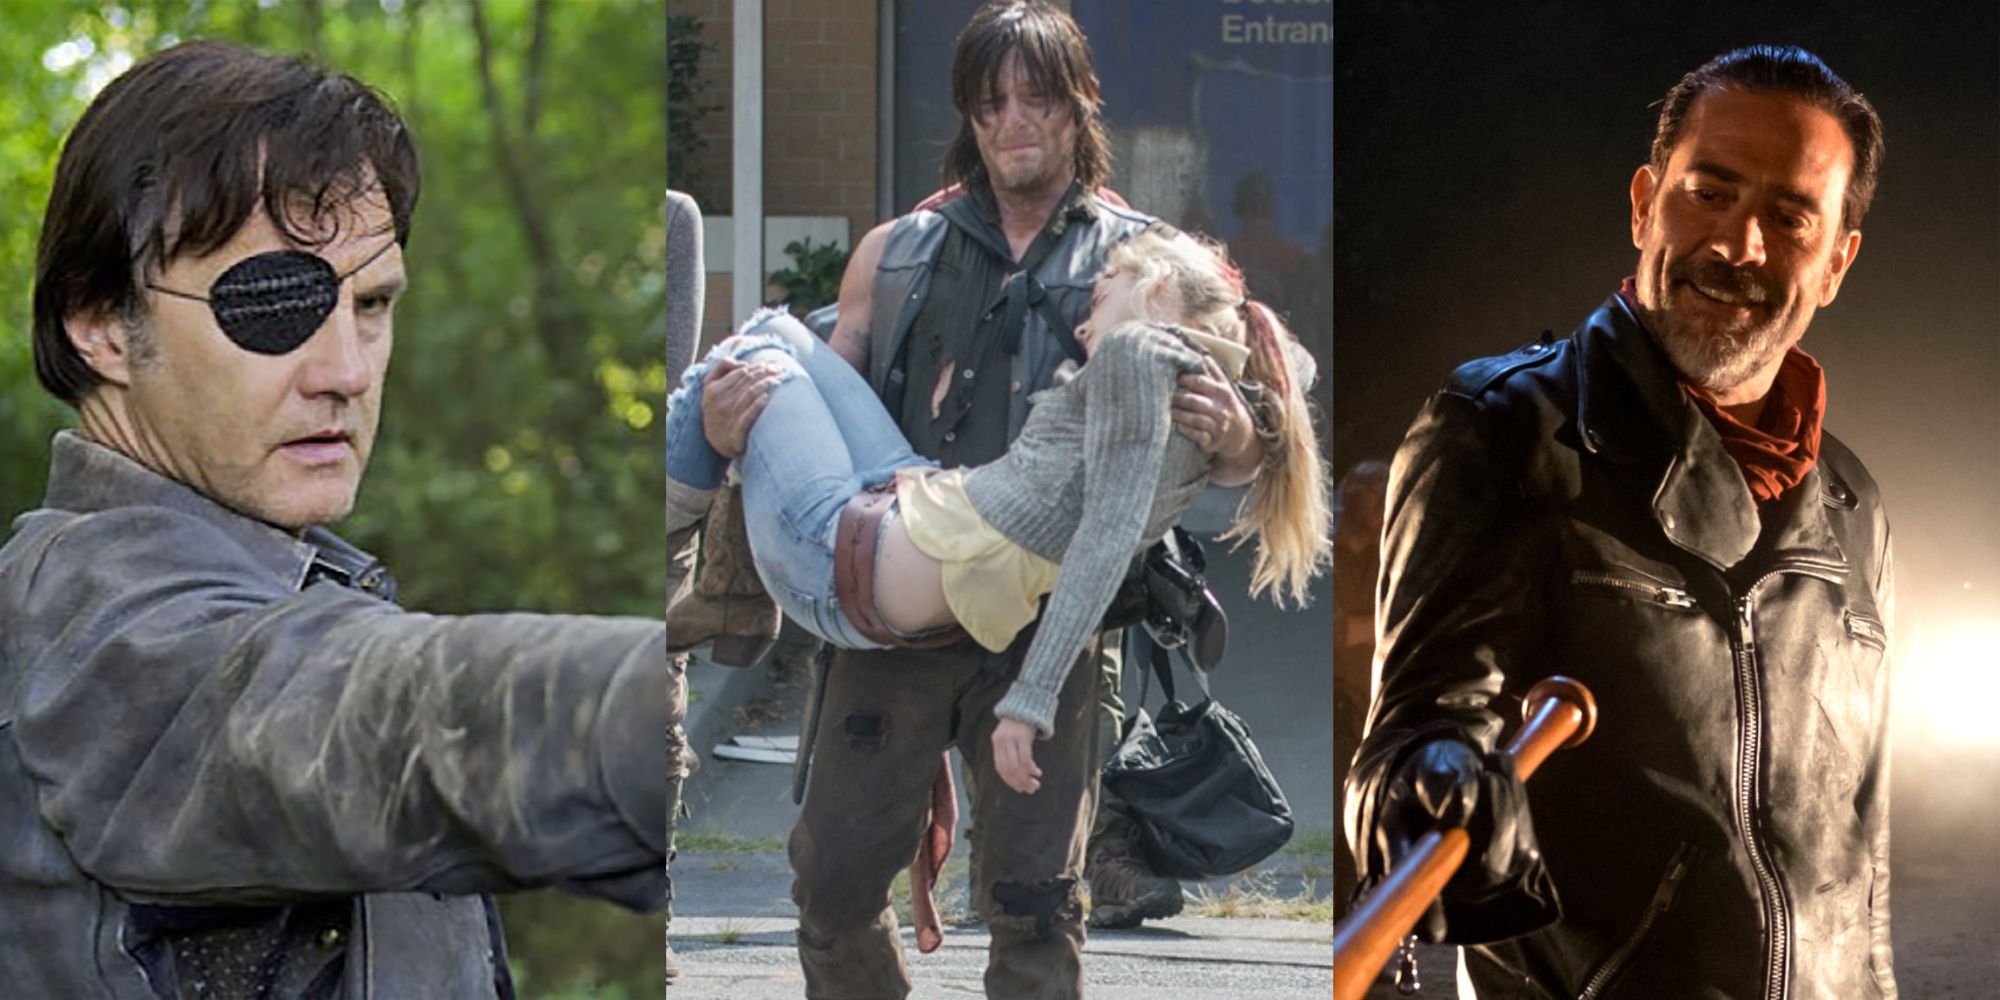 A split image of The Governor, Daryl carrying Beth, and Negan in The Walking Dead